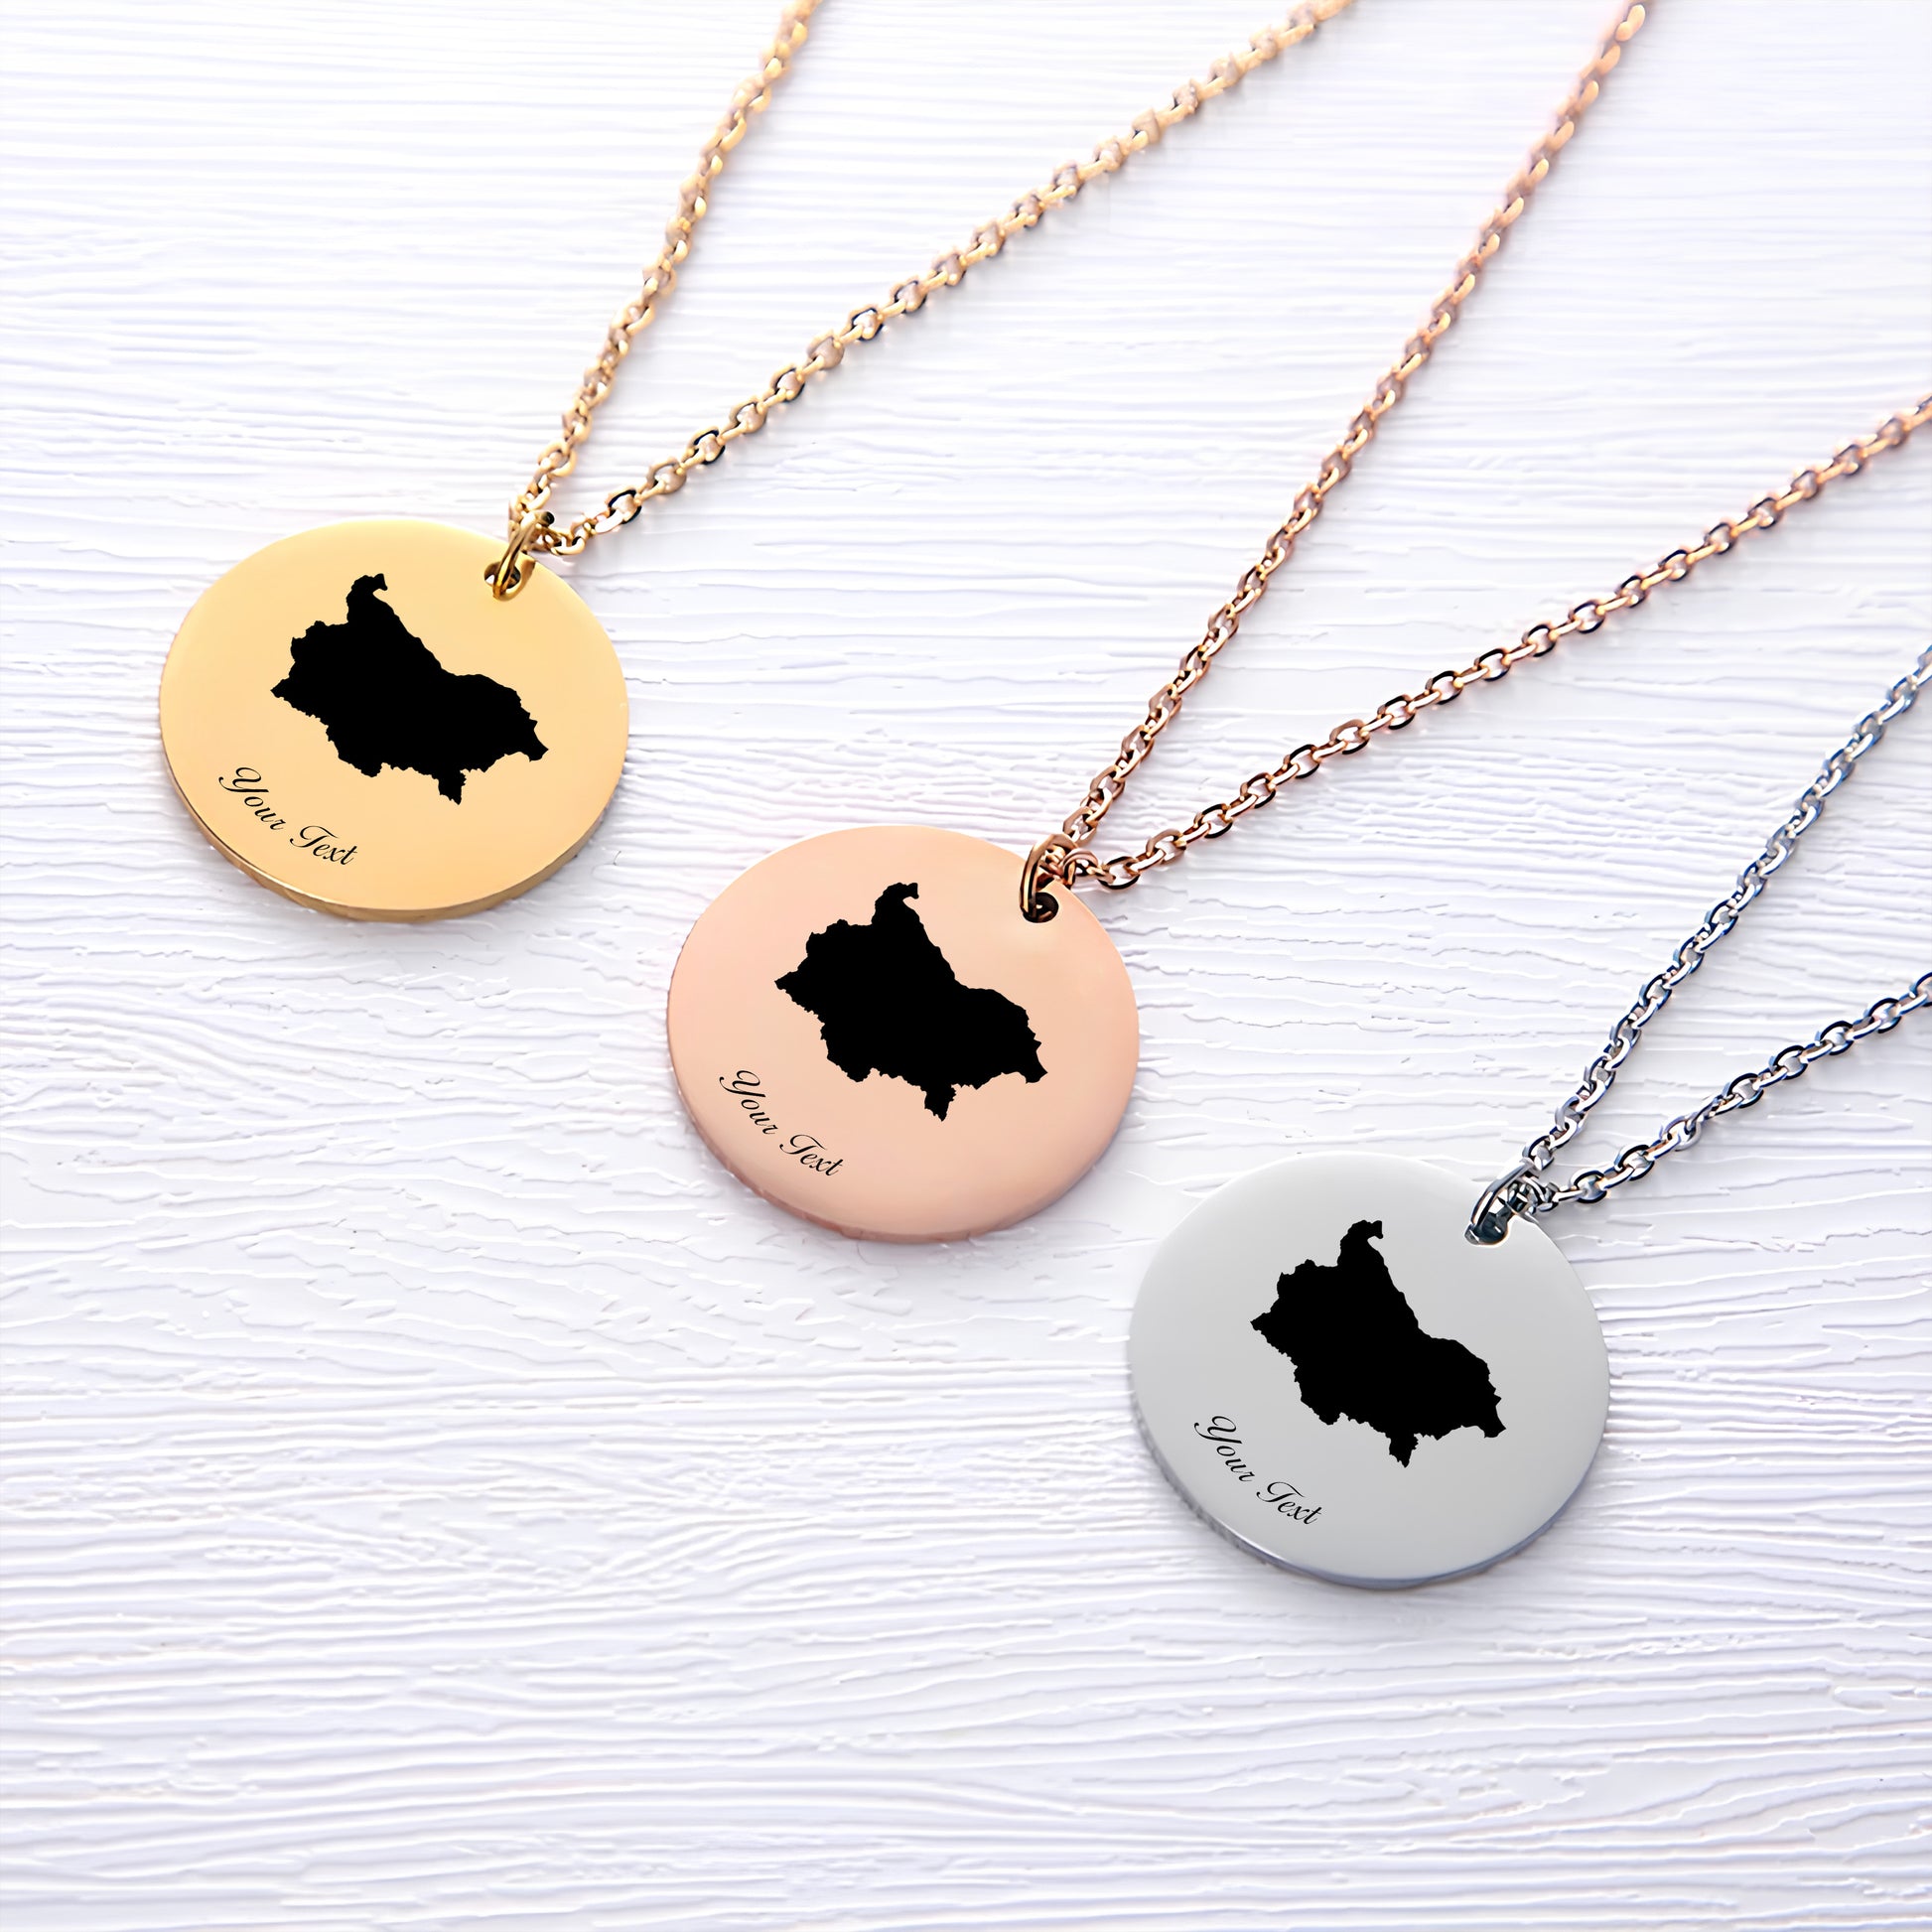 Bulgaria Country Map Necklace - Personalizable Jewelry